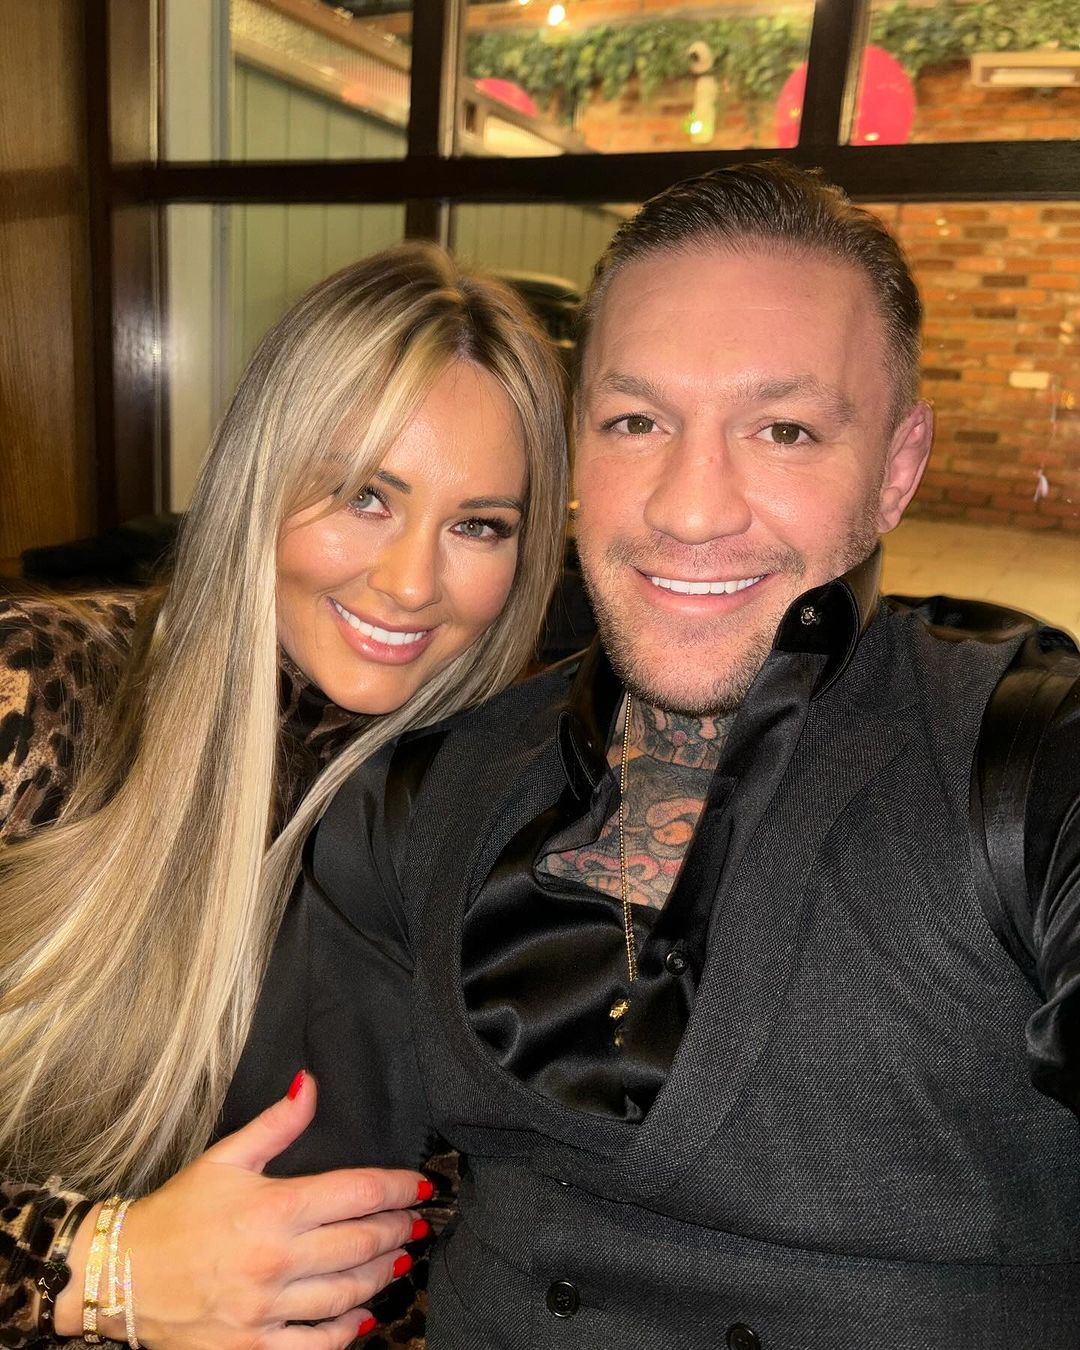 Conor McGregor and his partner Dee Devlin during a Valentines date